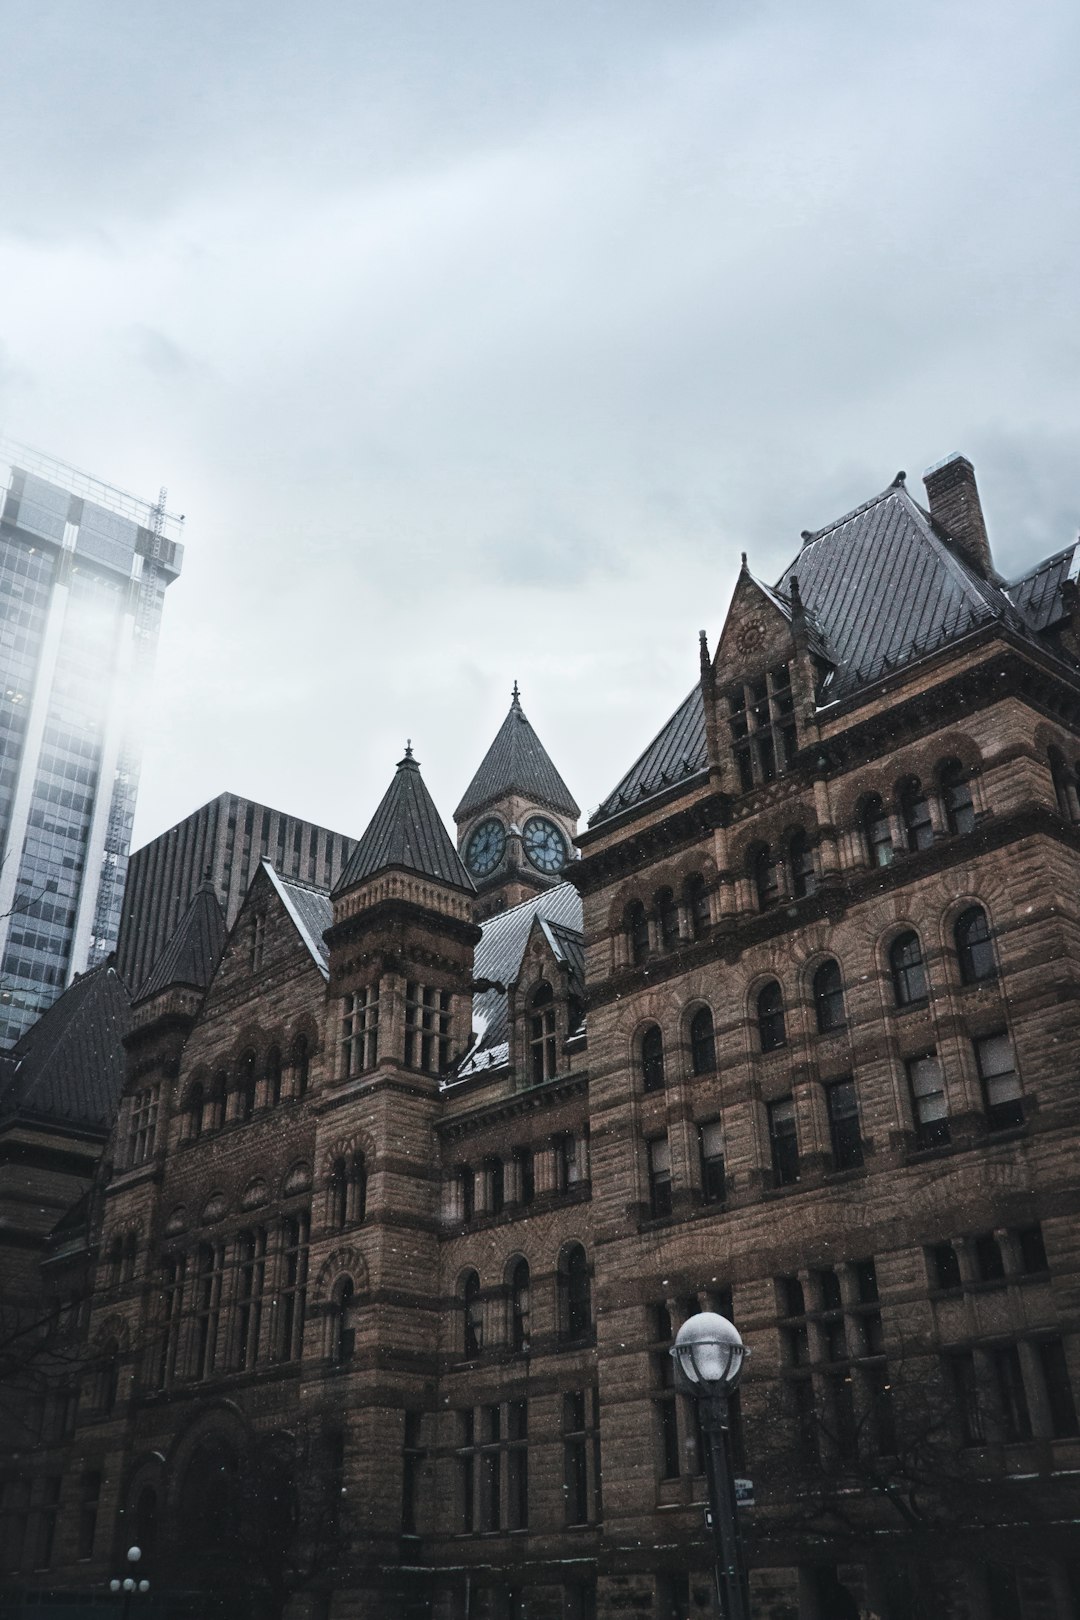 Travel Tips and Stories of Old City Hall in Canada